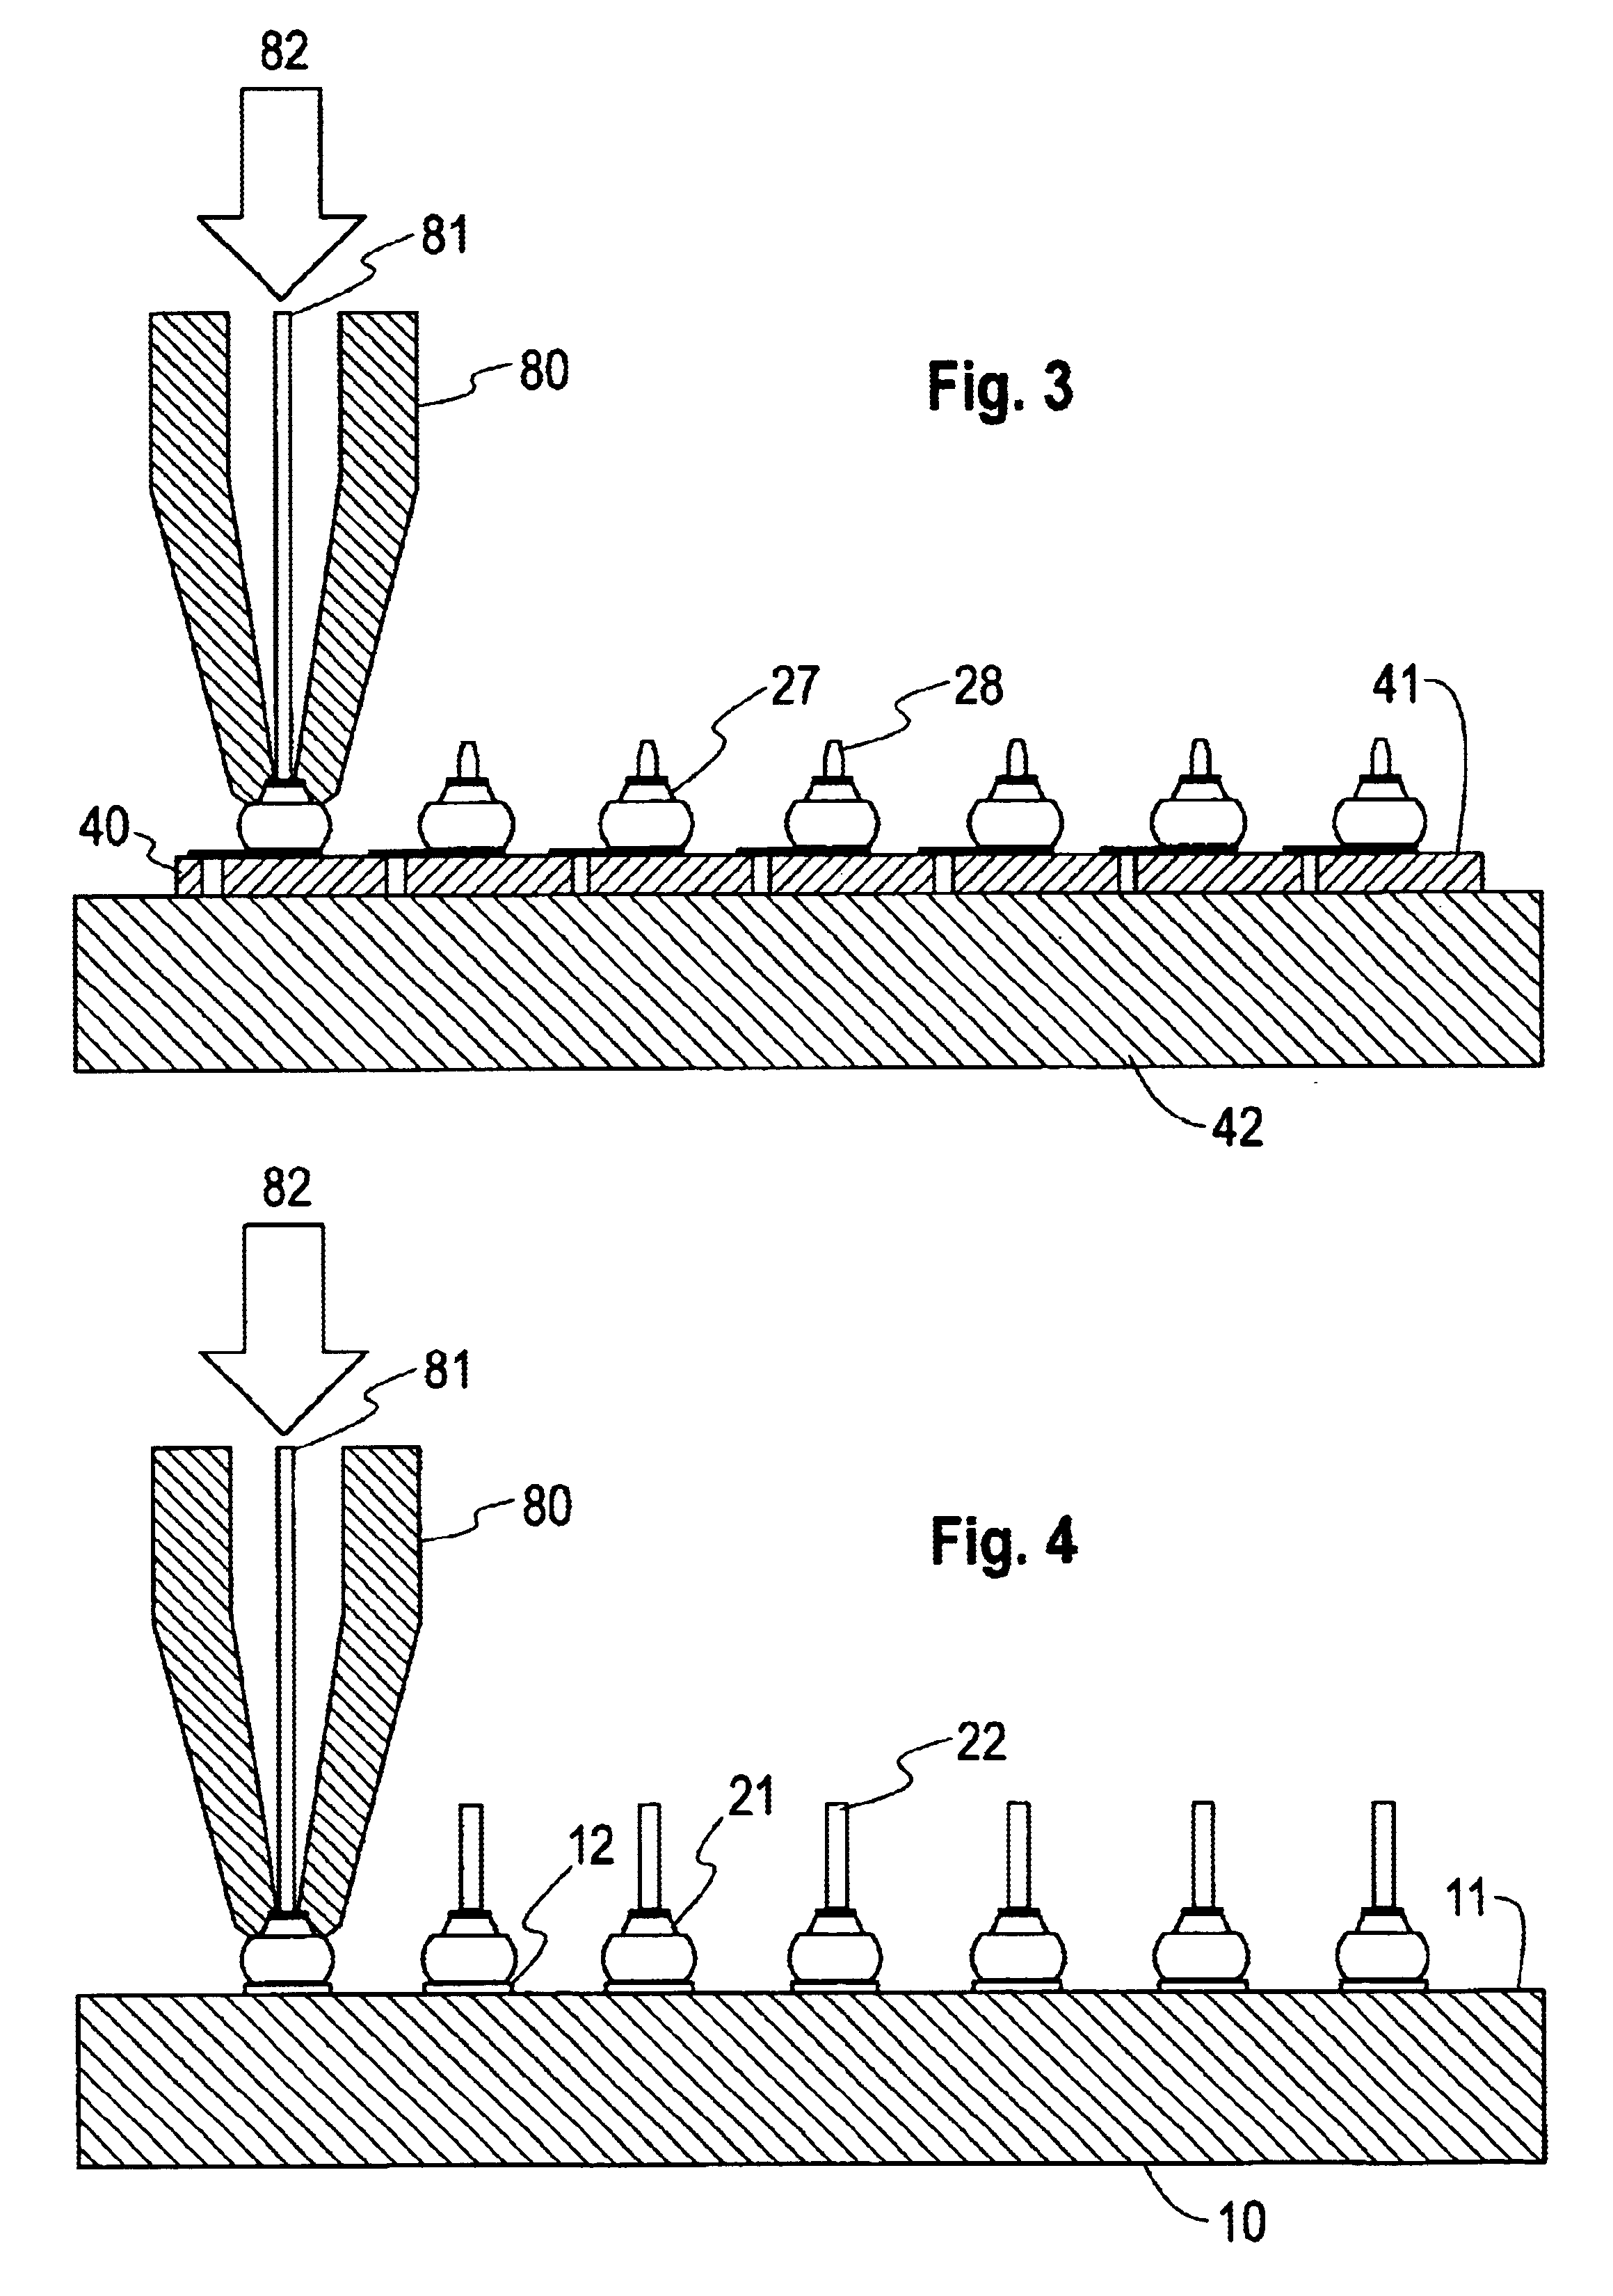 Method of forming a structure for electronic devices contact locations